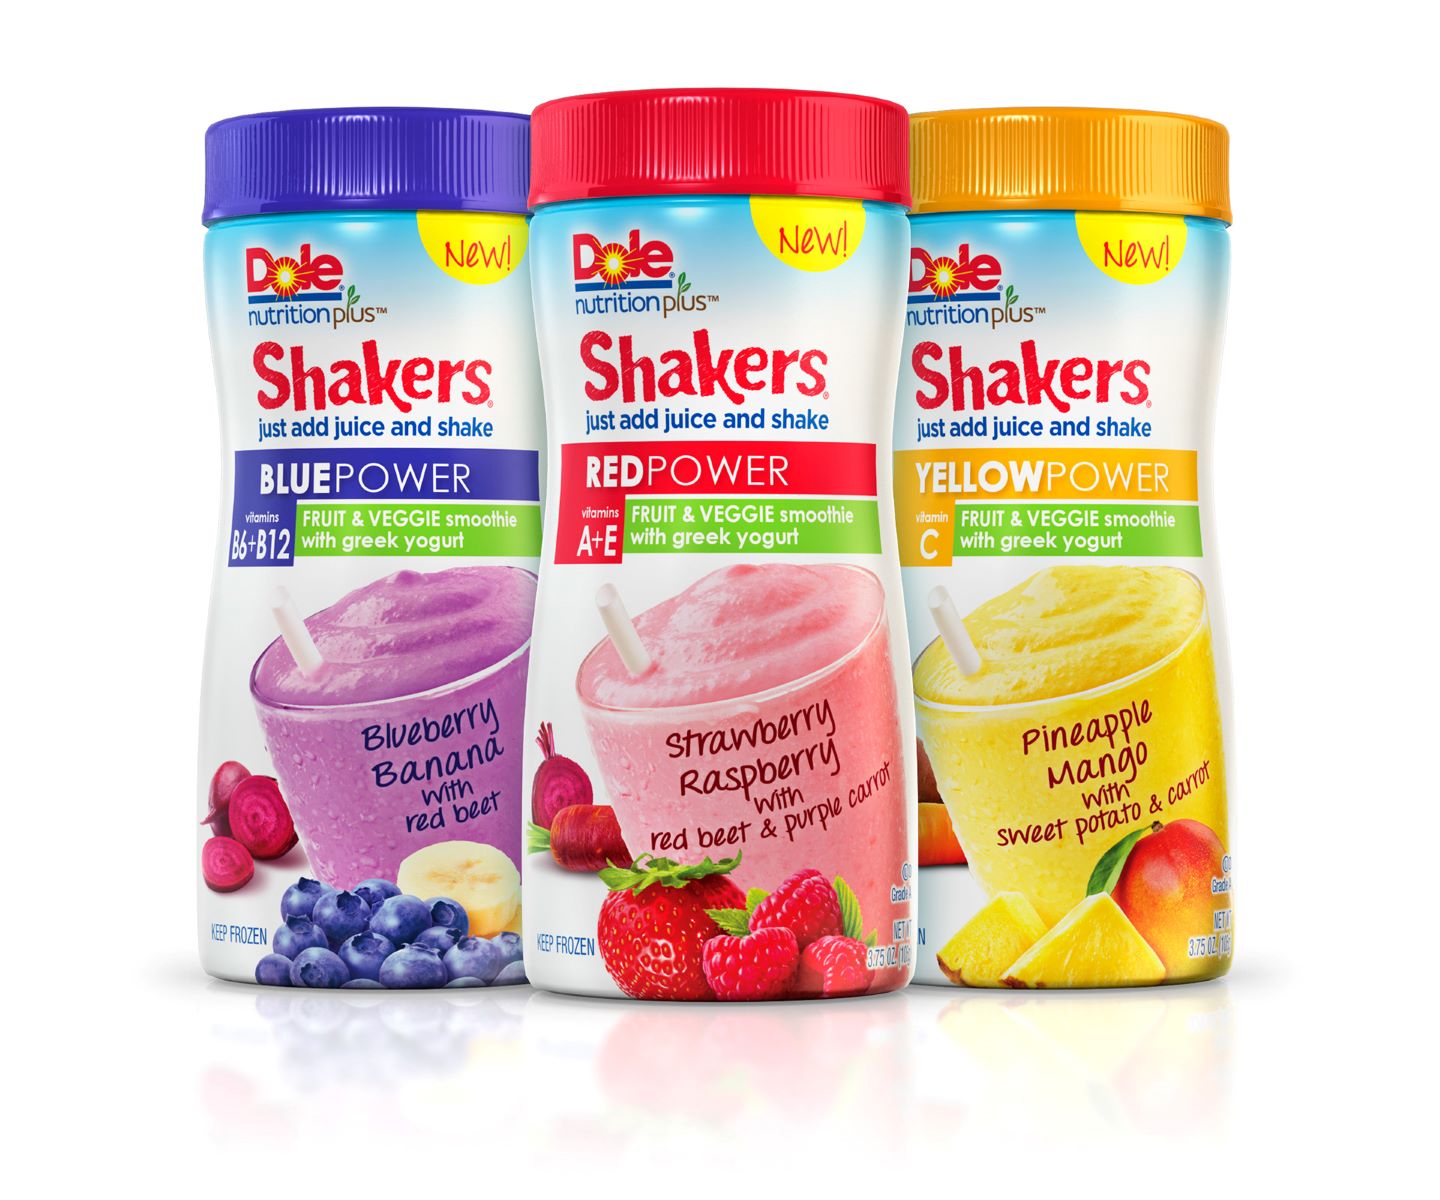 10-dole-shakers-nutrition-facts